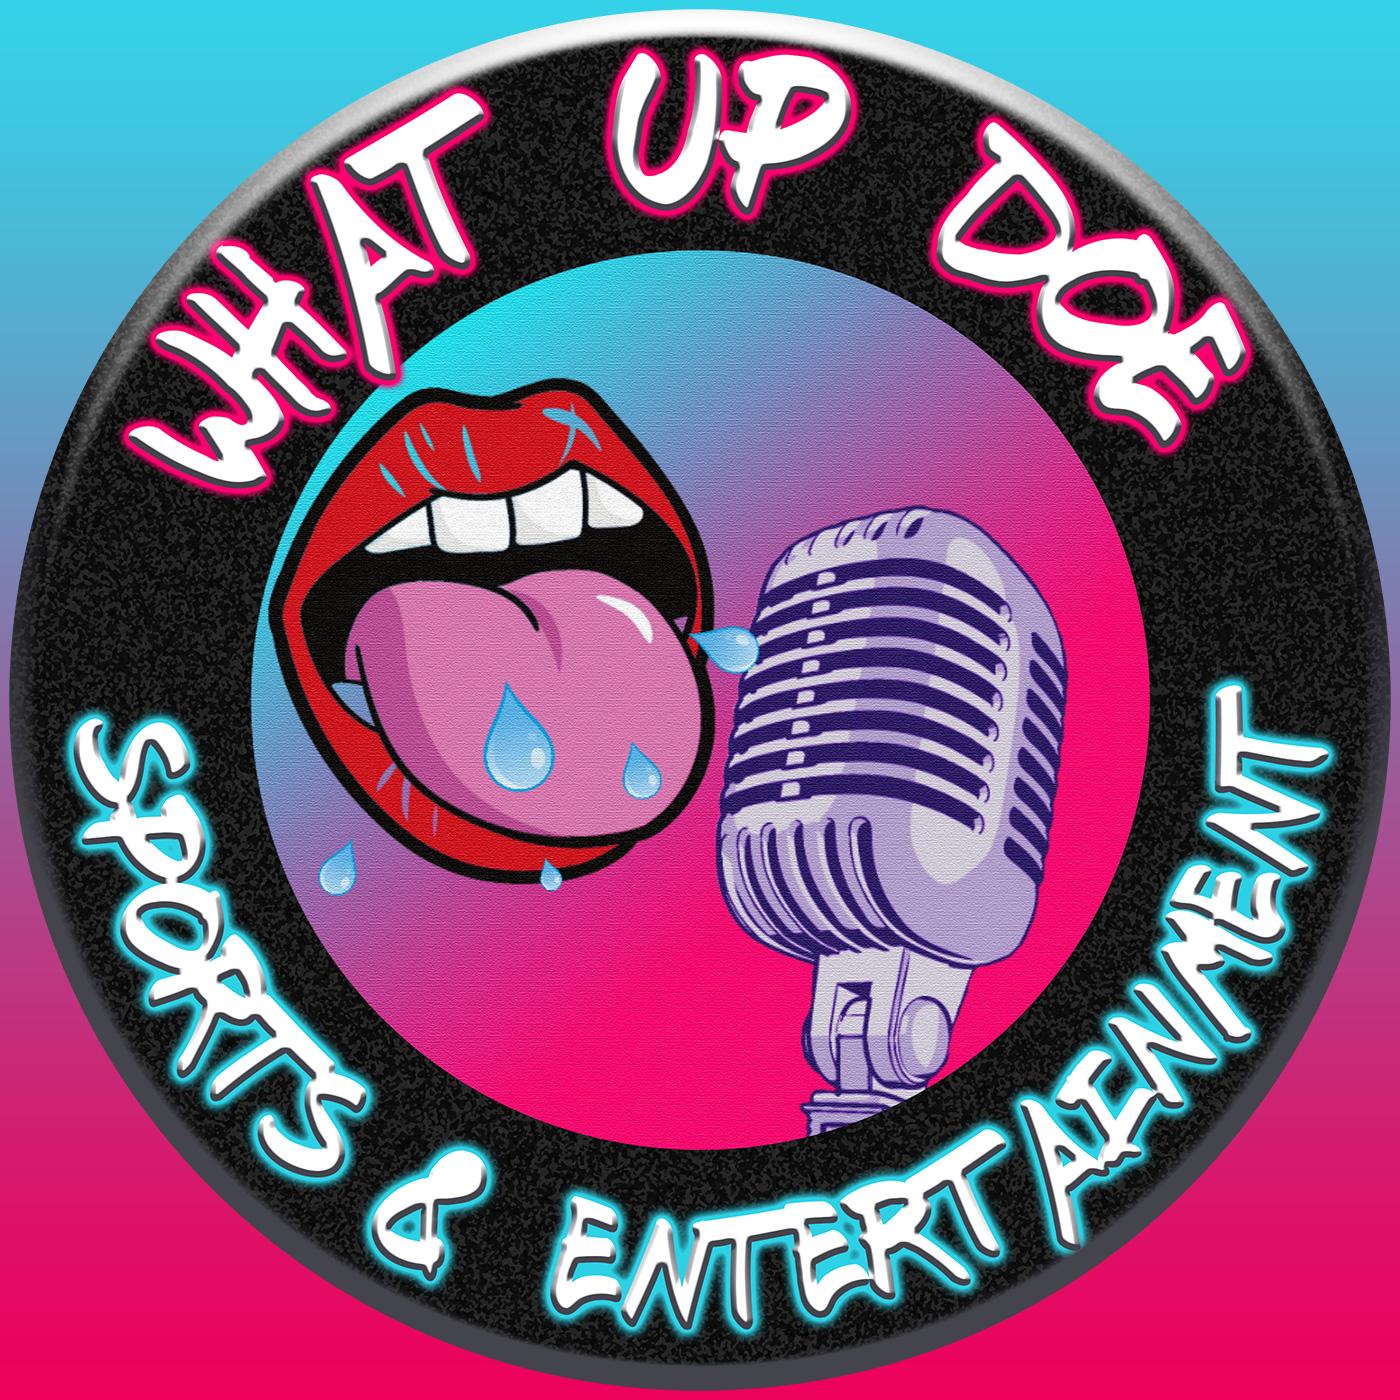 What Up Doe Sports and Entertainment